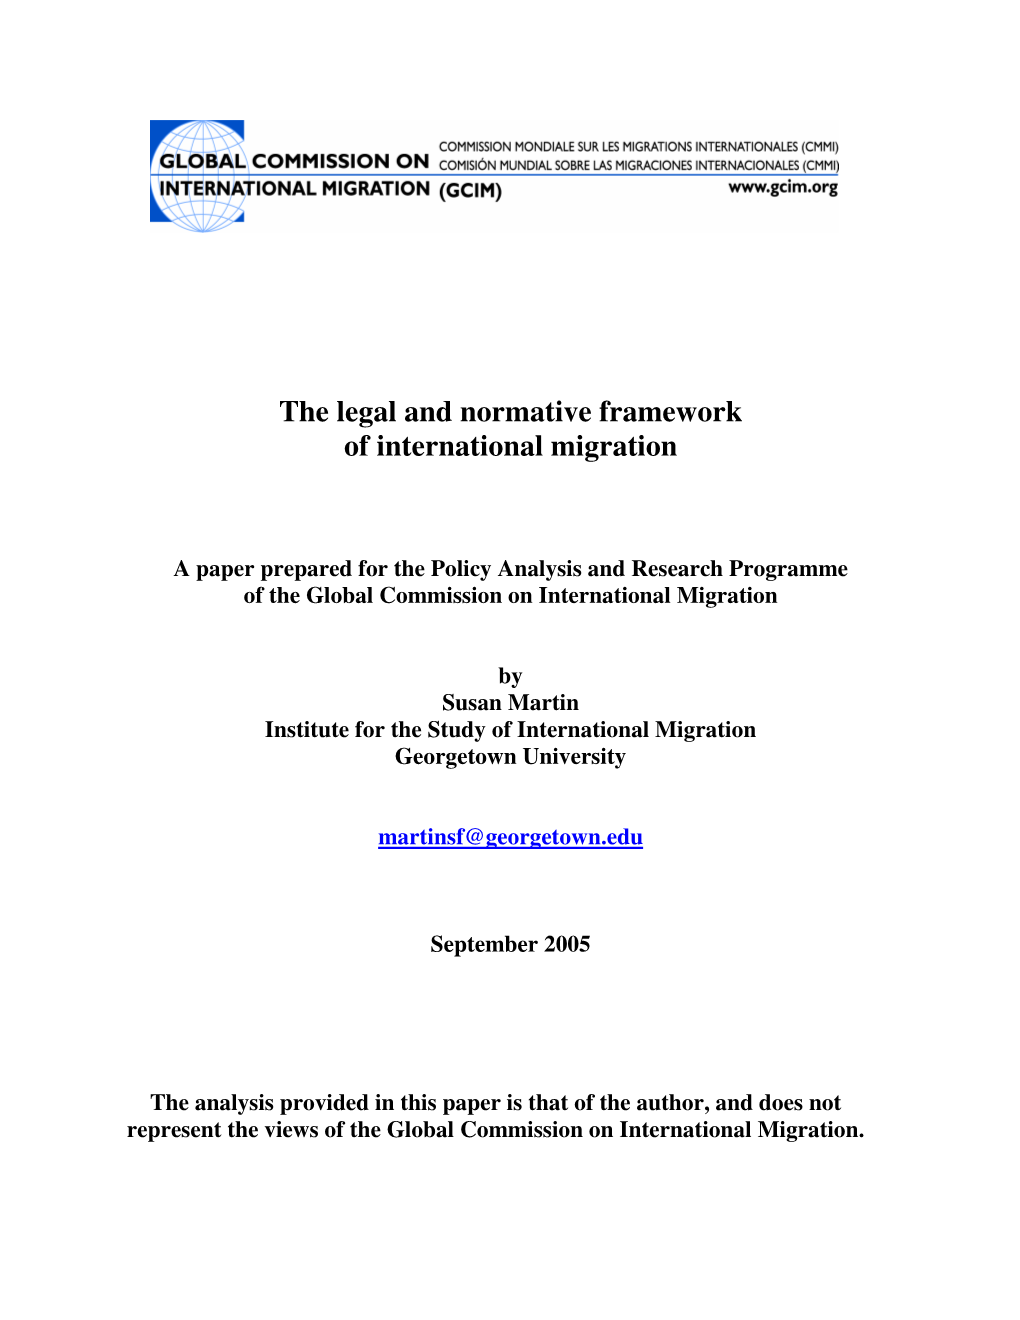 The Legal and Normative Framework of International Migration